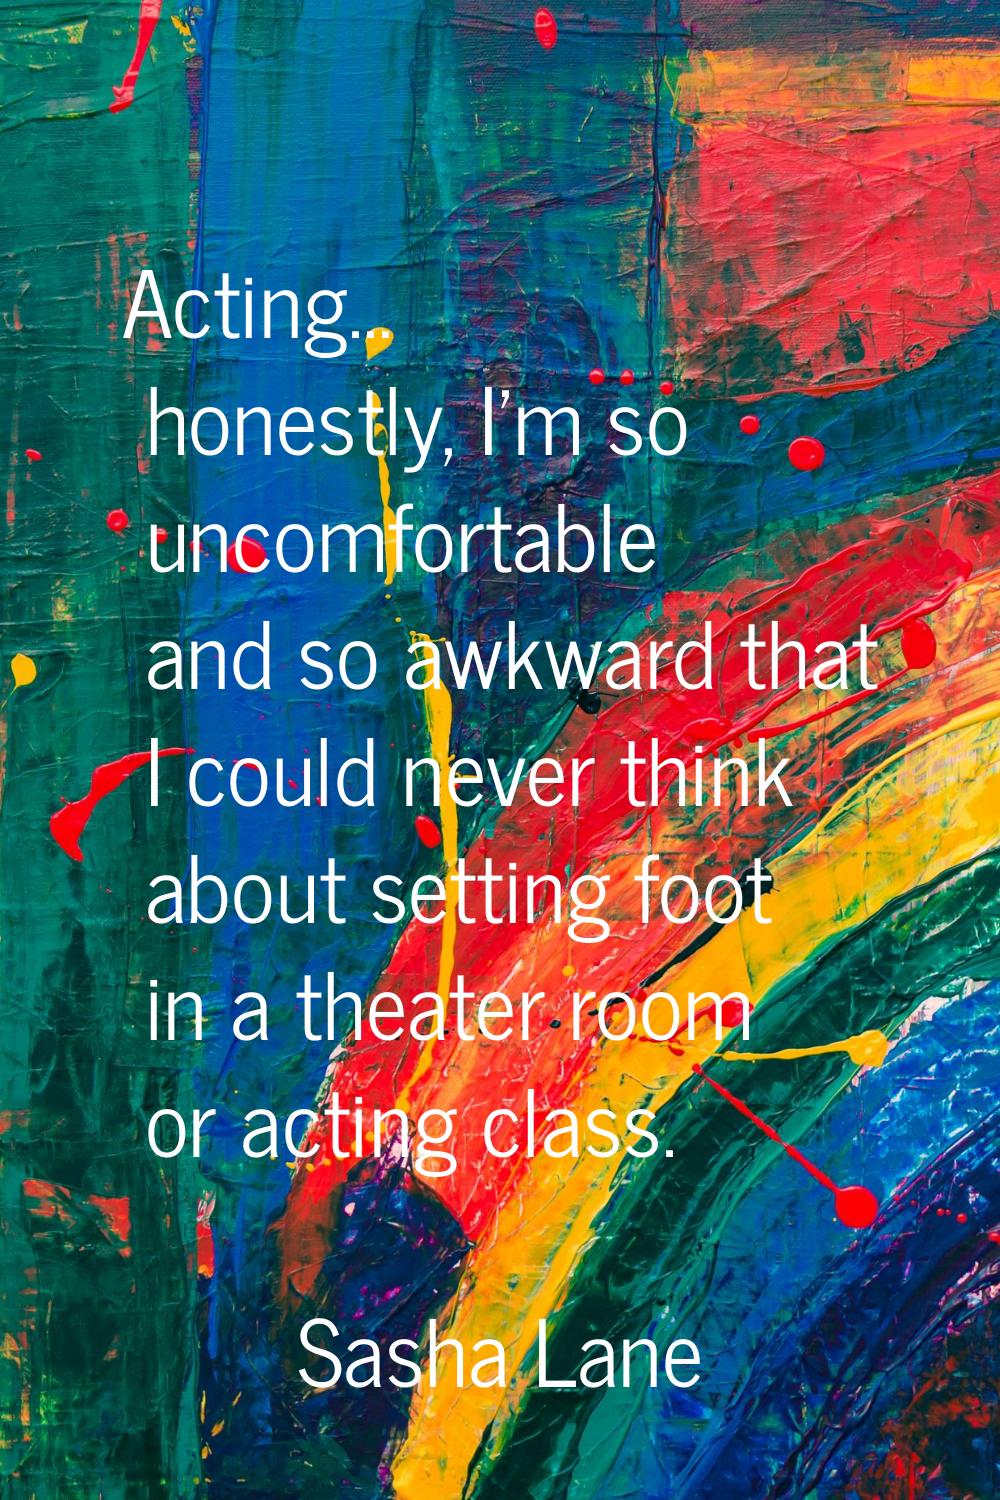 Acting... honestly, I'm so uncomfortable and so awkward that I could never think about setting foot